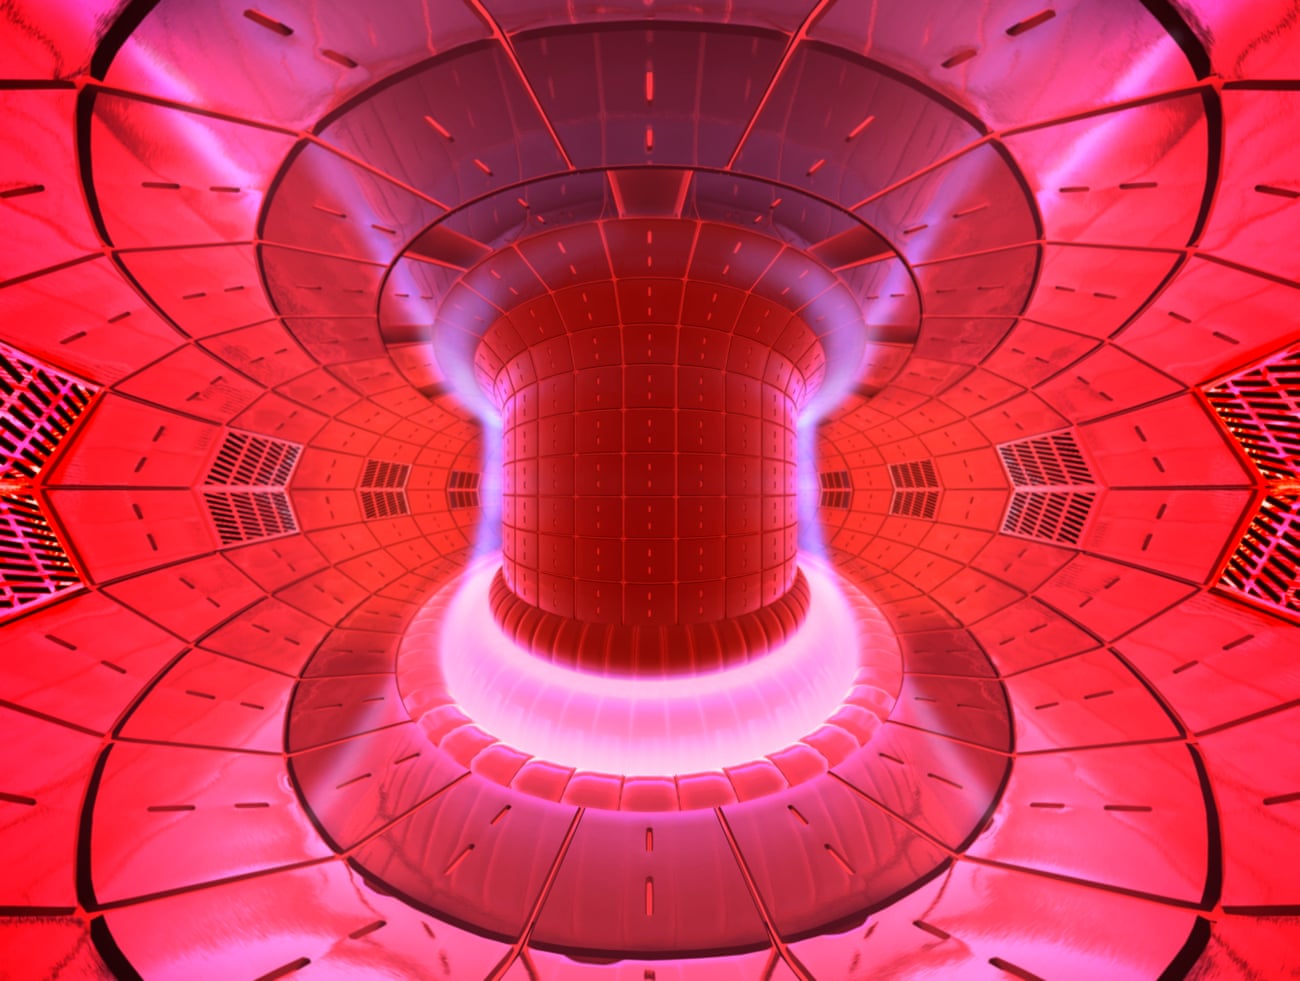 An artist’s rendering of the reaction vessel at Iter in the south of France.